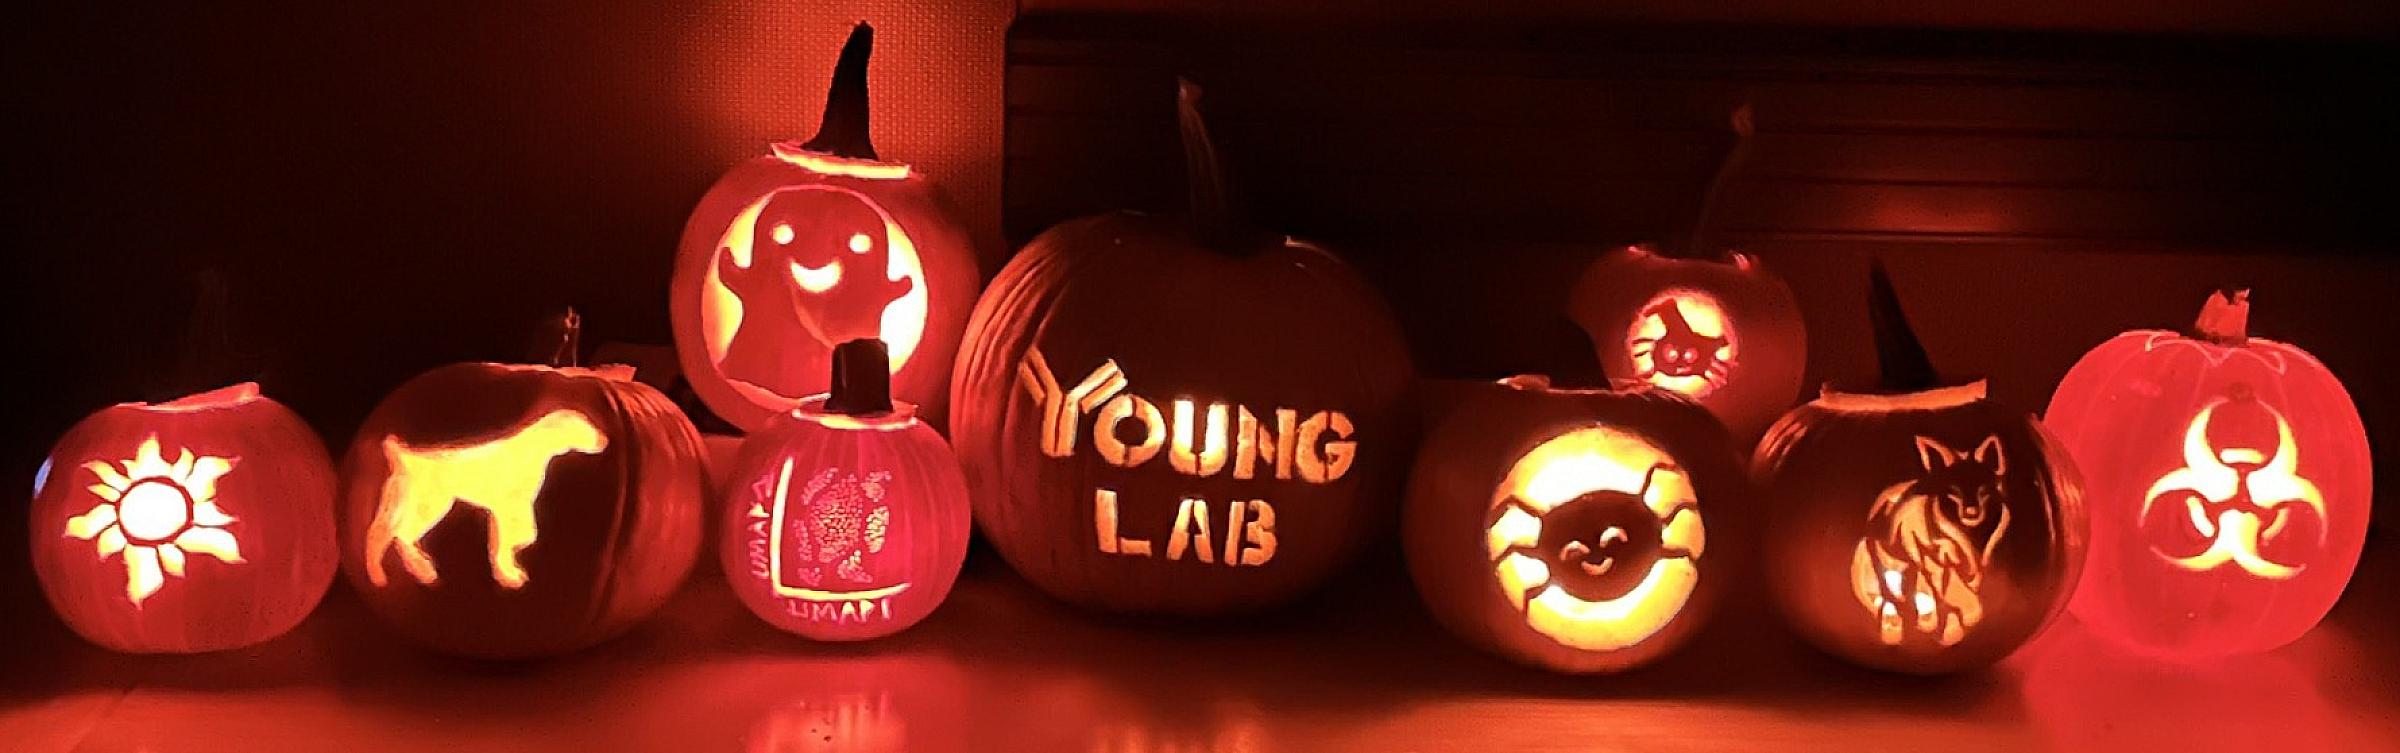 2nd Annual Young Lab Pumpkin Carving